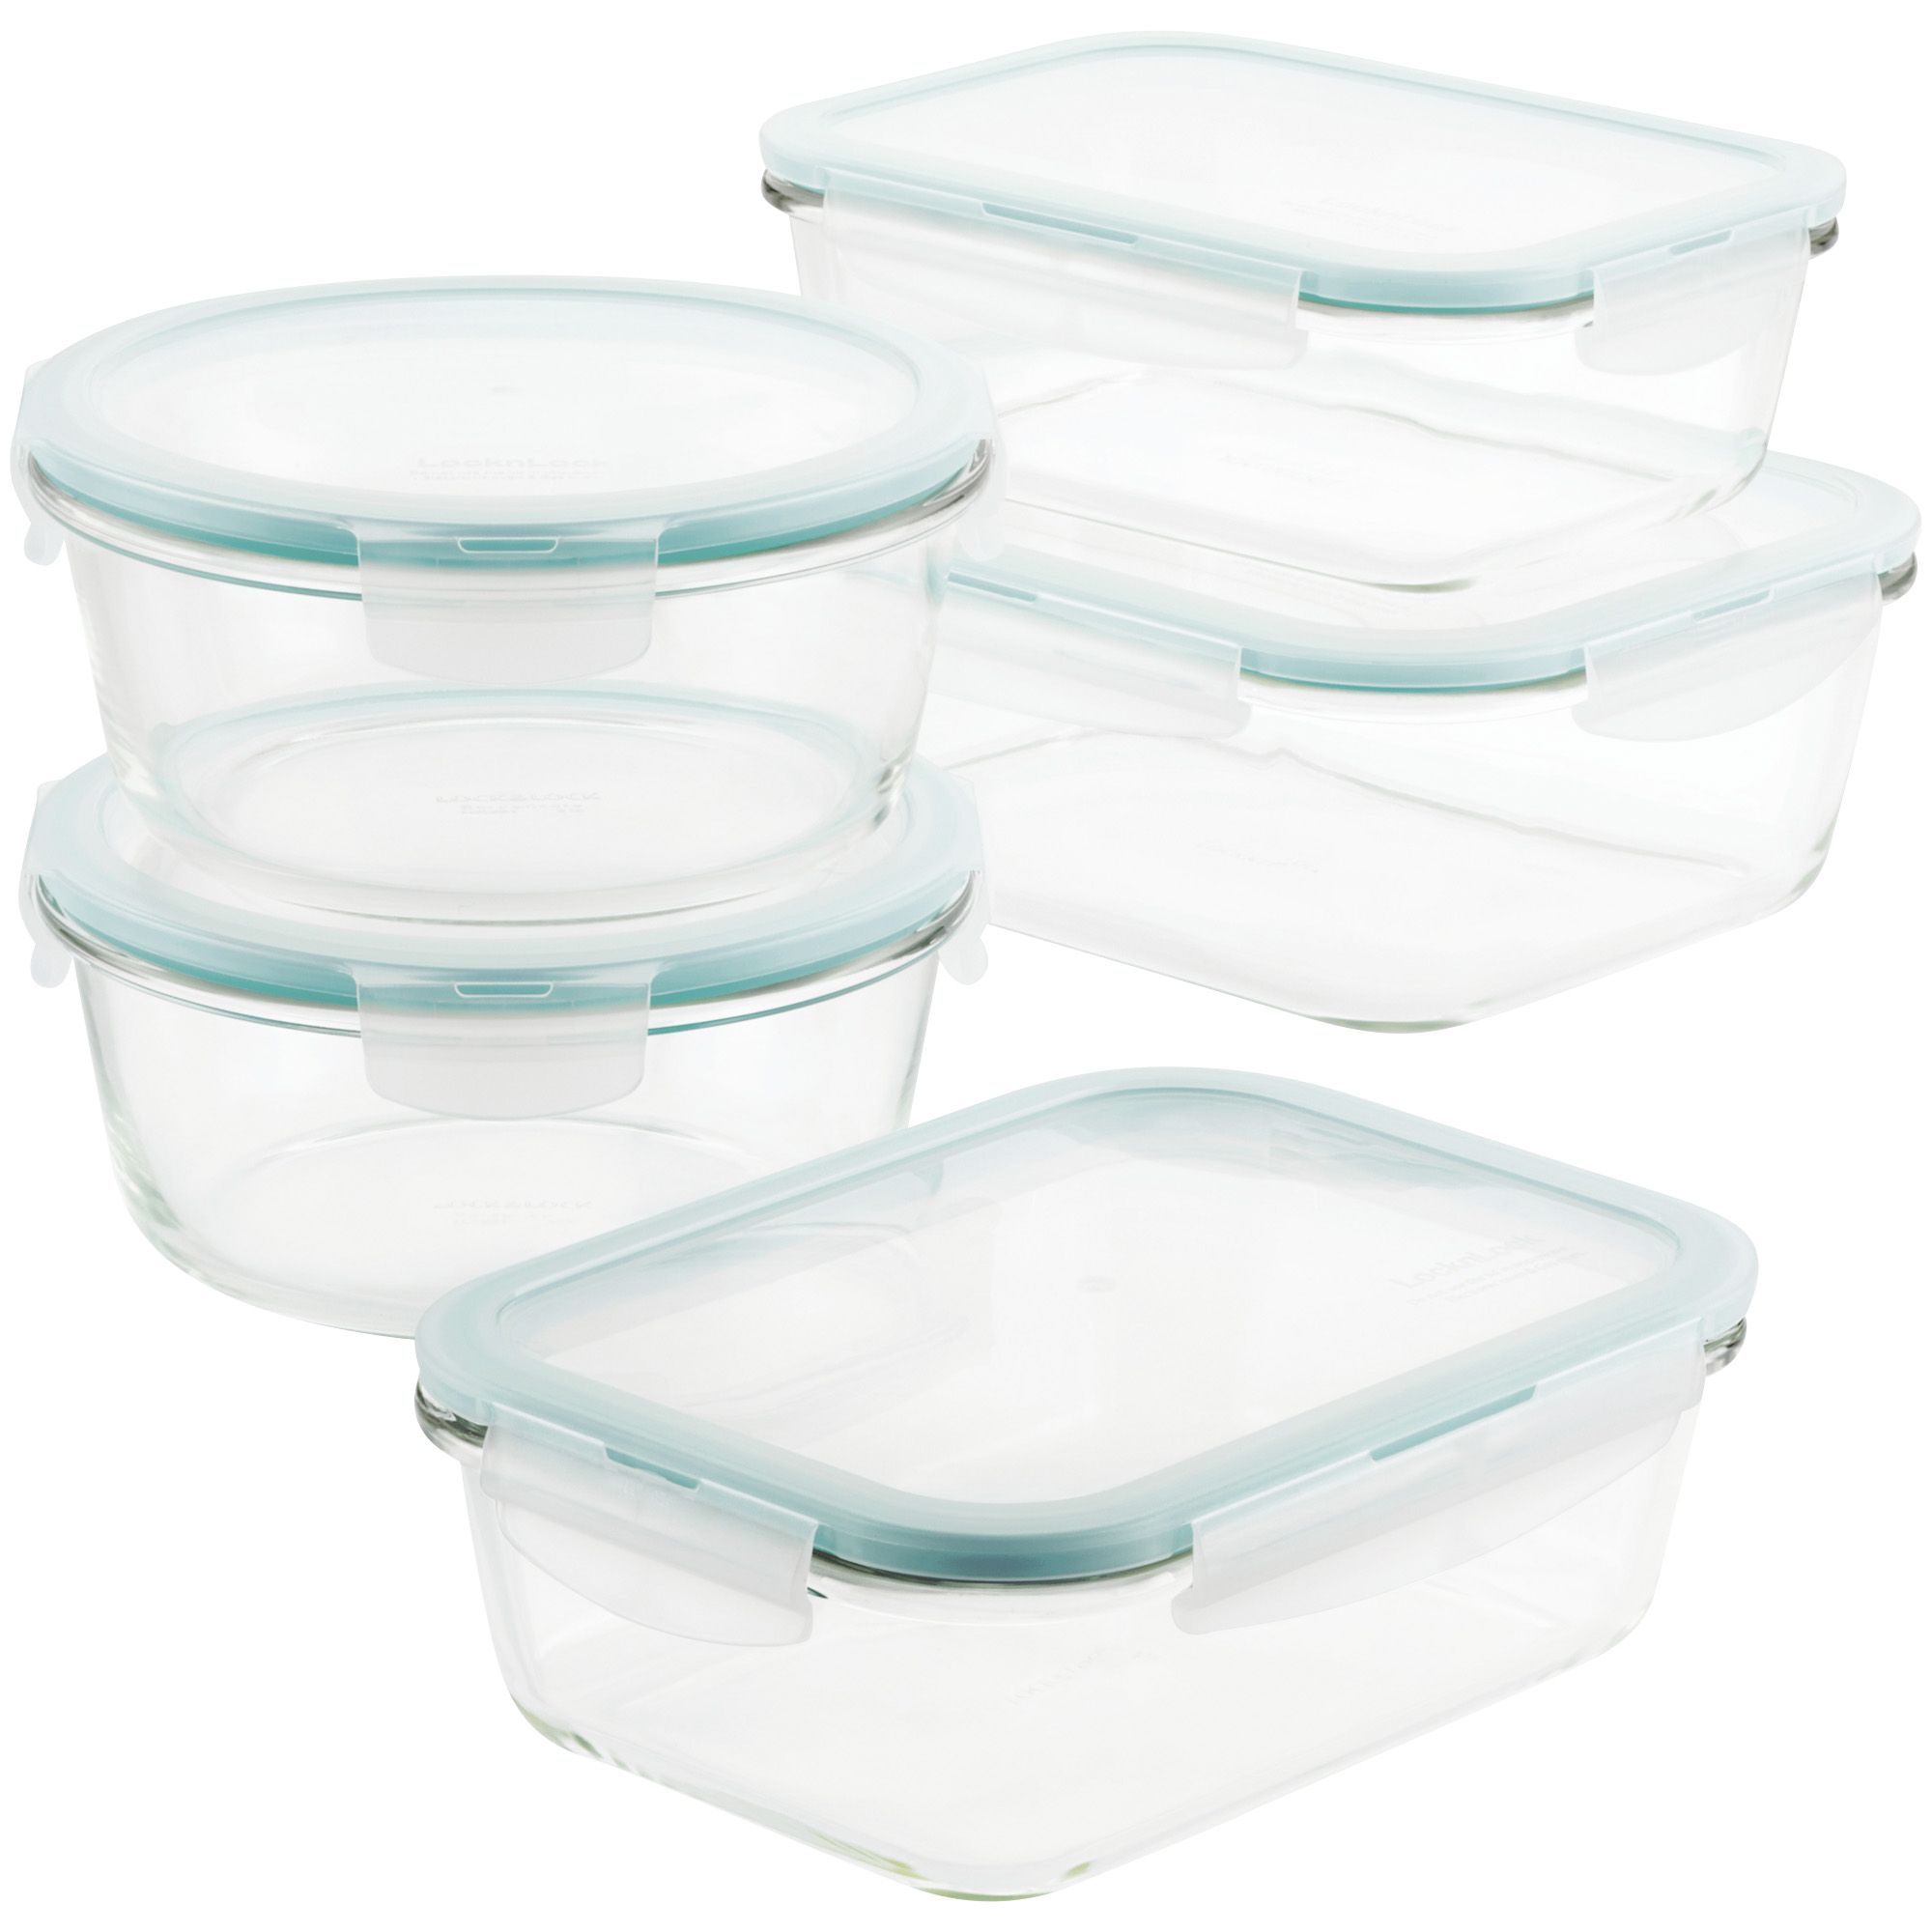 Lock & Lock Purely Better 17-oz. Glass Square Food Storage Container